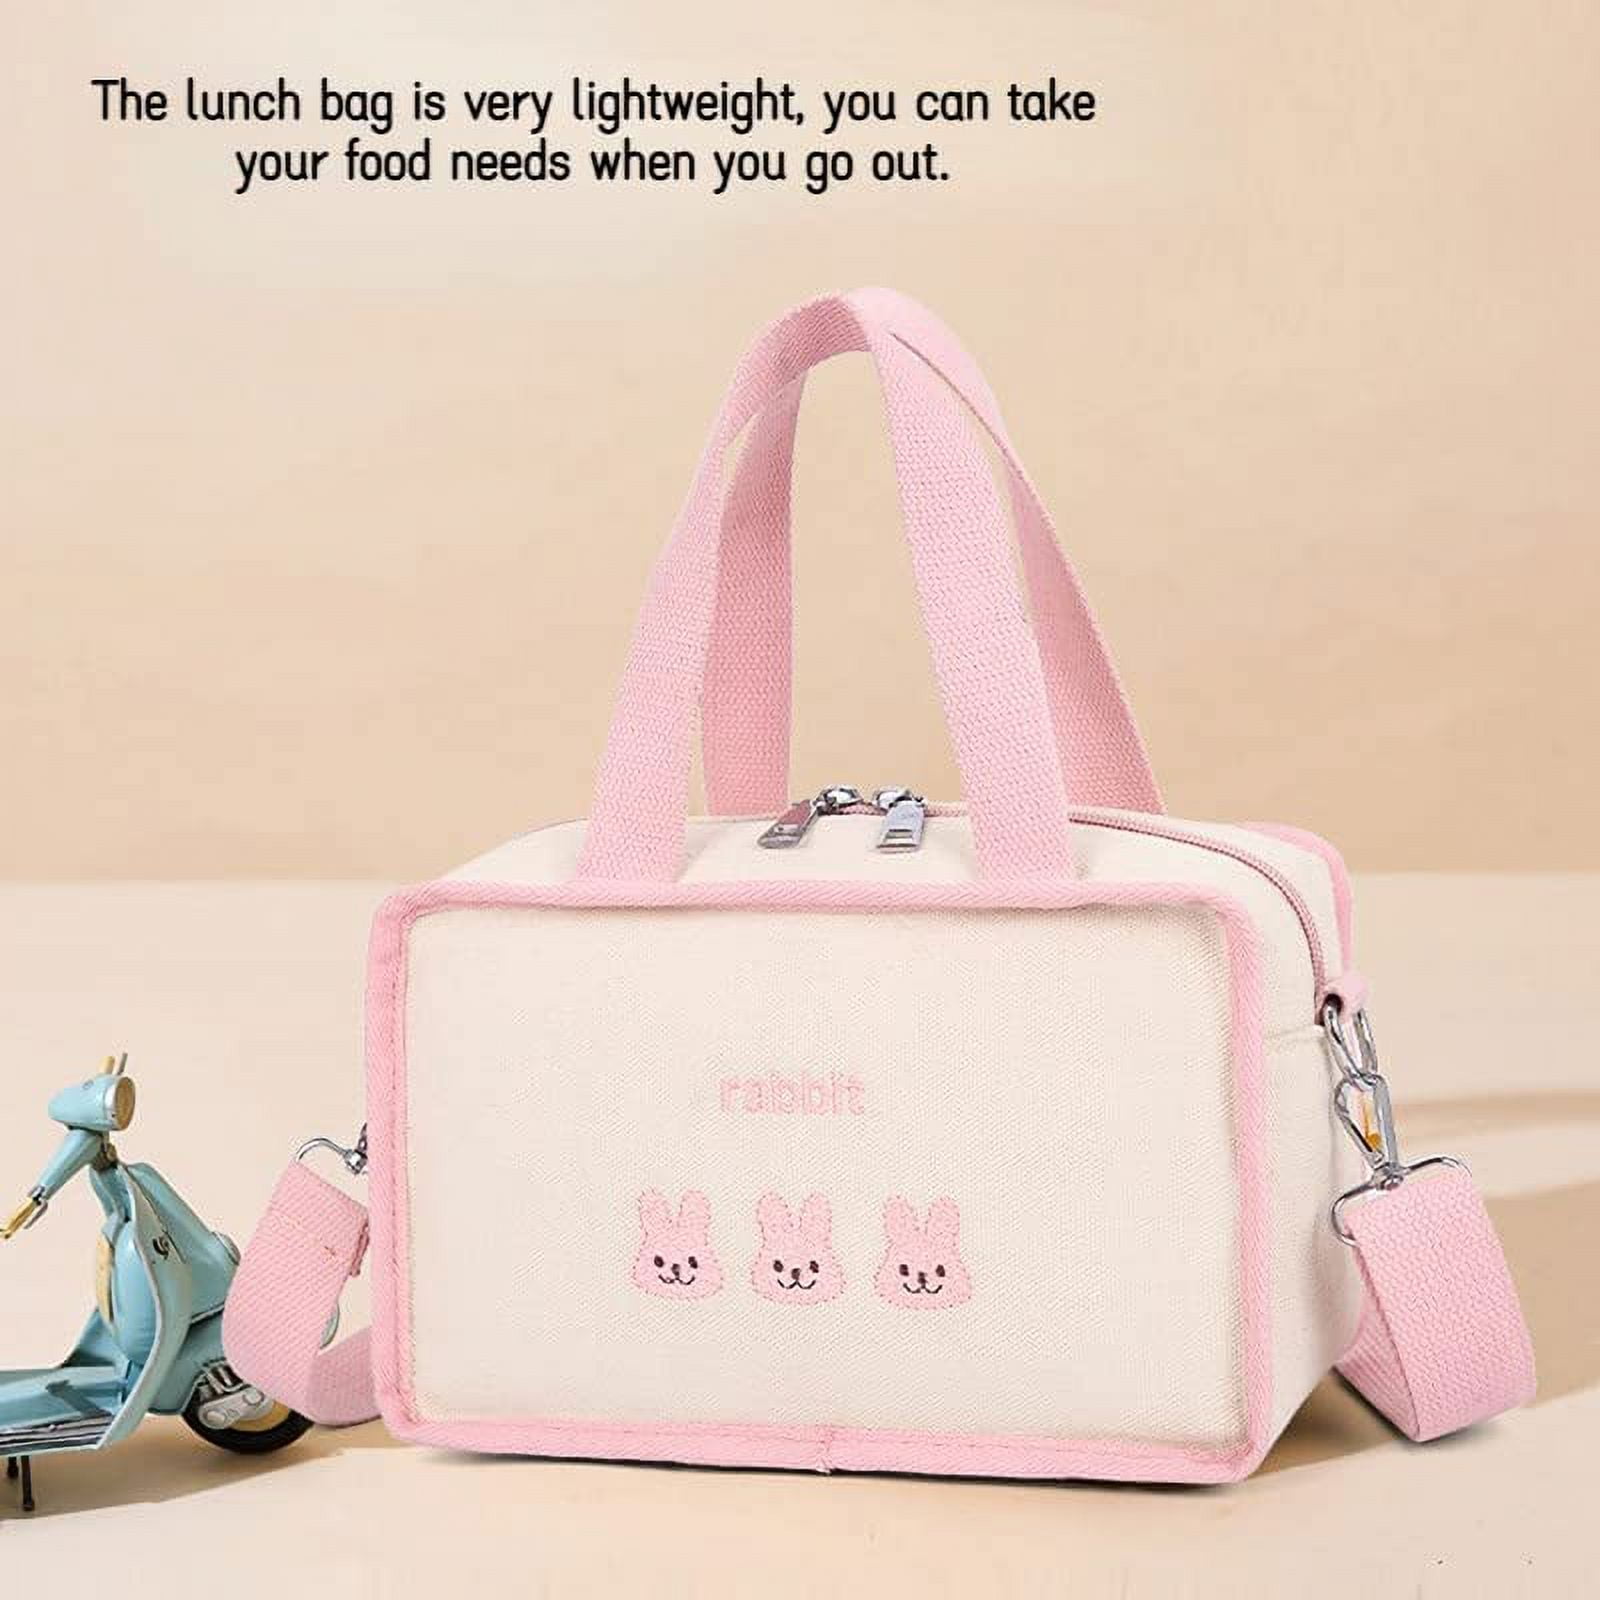 Danceemangoo Kawaii Lunch Tote Bag Cute Embroidery Bear Insulated Lunch Bag Aesthetic Lunch Box Preppy Lunch Bags for Women (Pink), Adult Unisex, Size